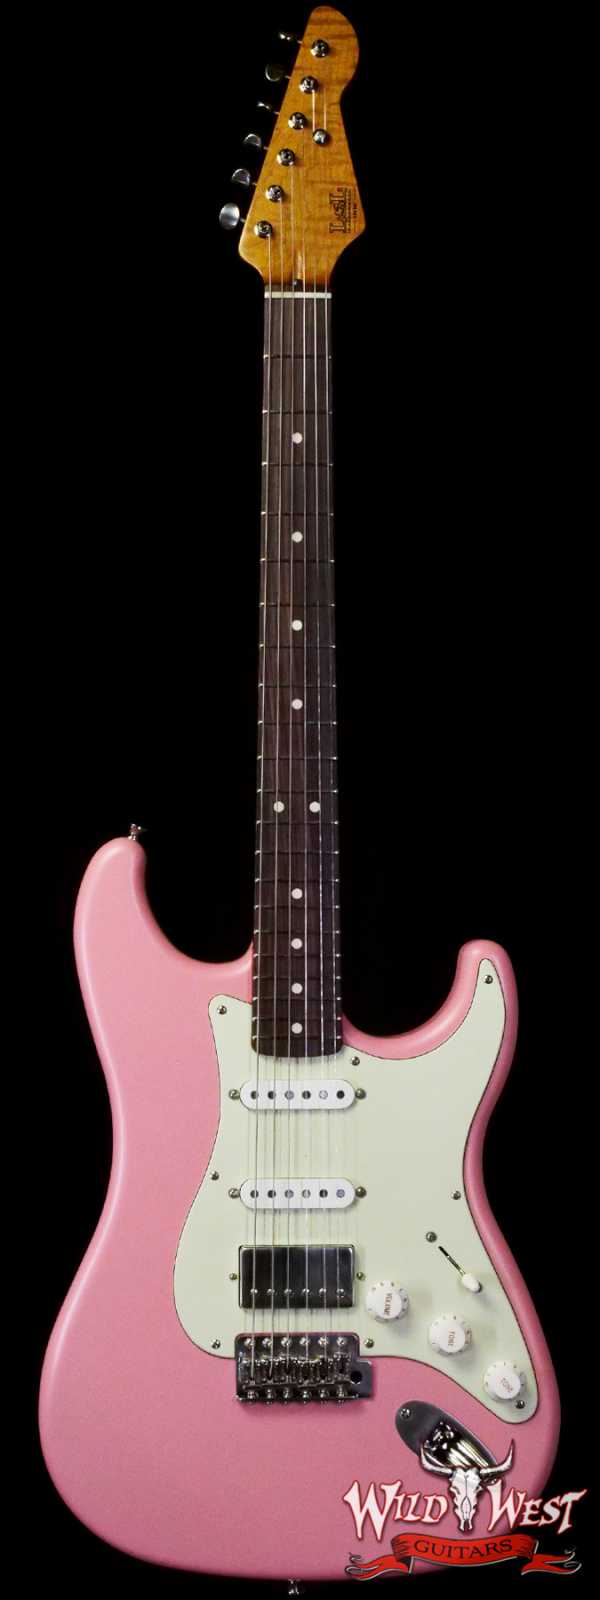 LsL Saticoy One B S Style HSS Roasted Flame Maple Neck Rosewood Fingerboard Shell Pink